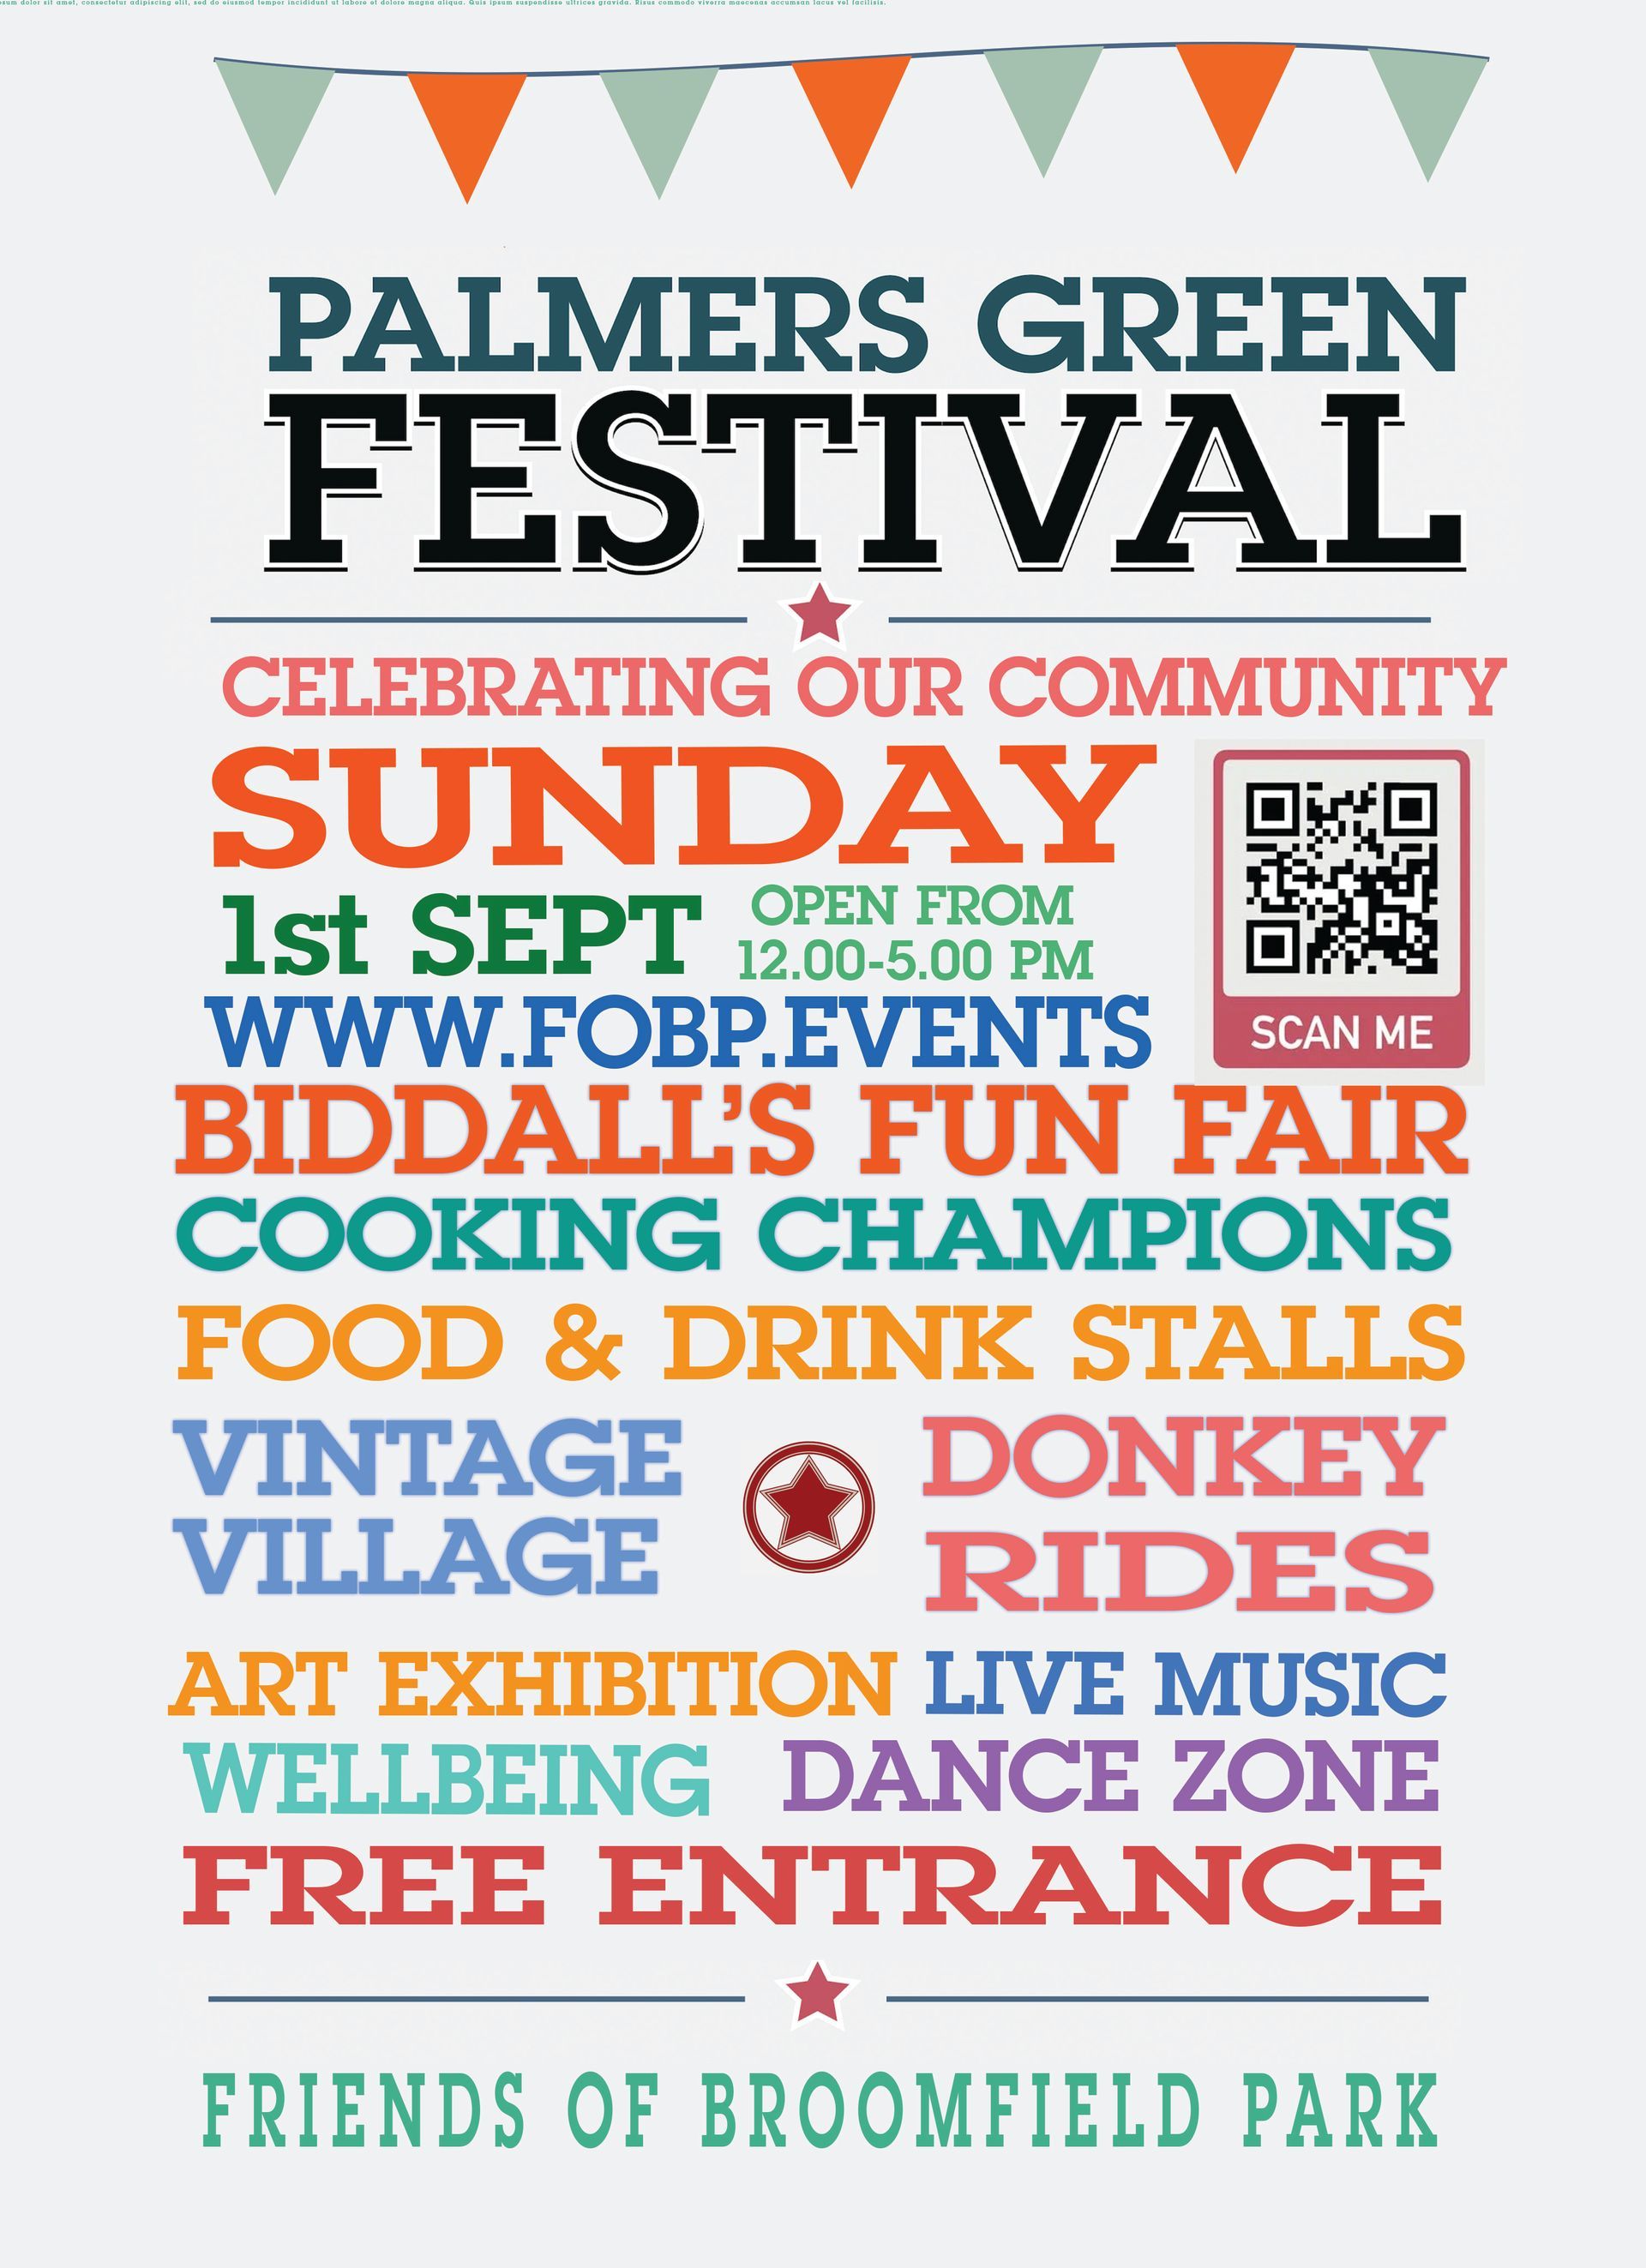 A poster for palmers green festival celebrating our community